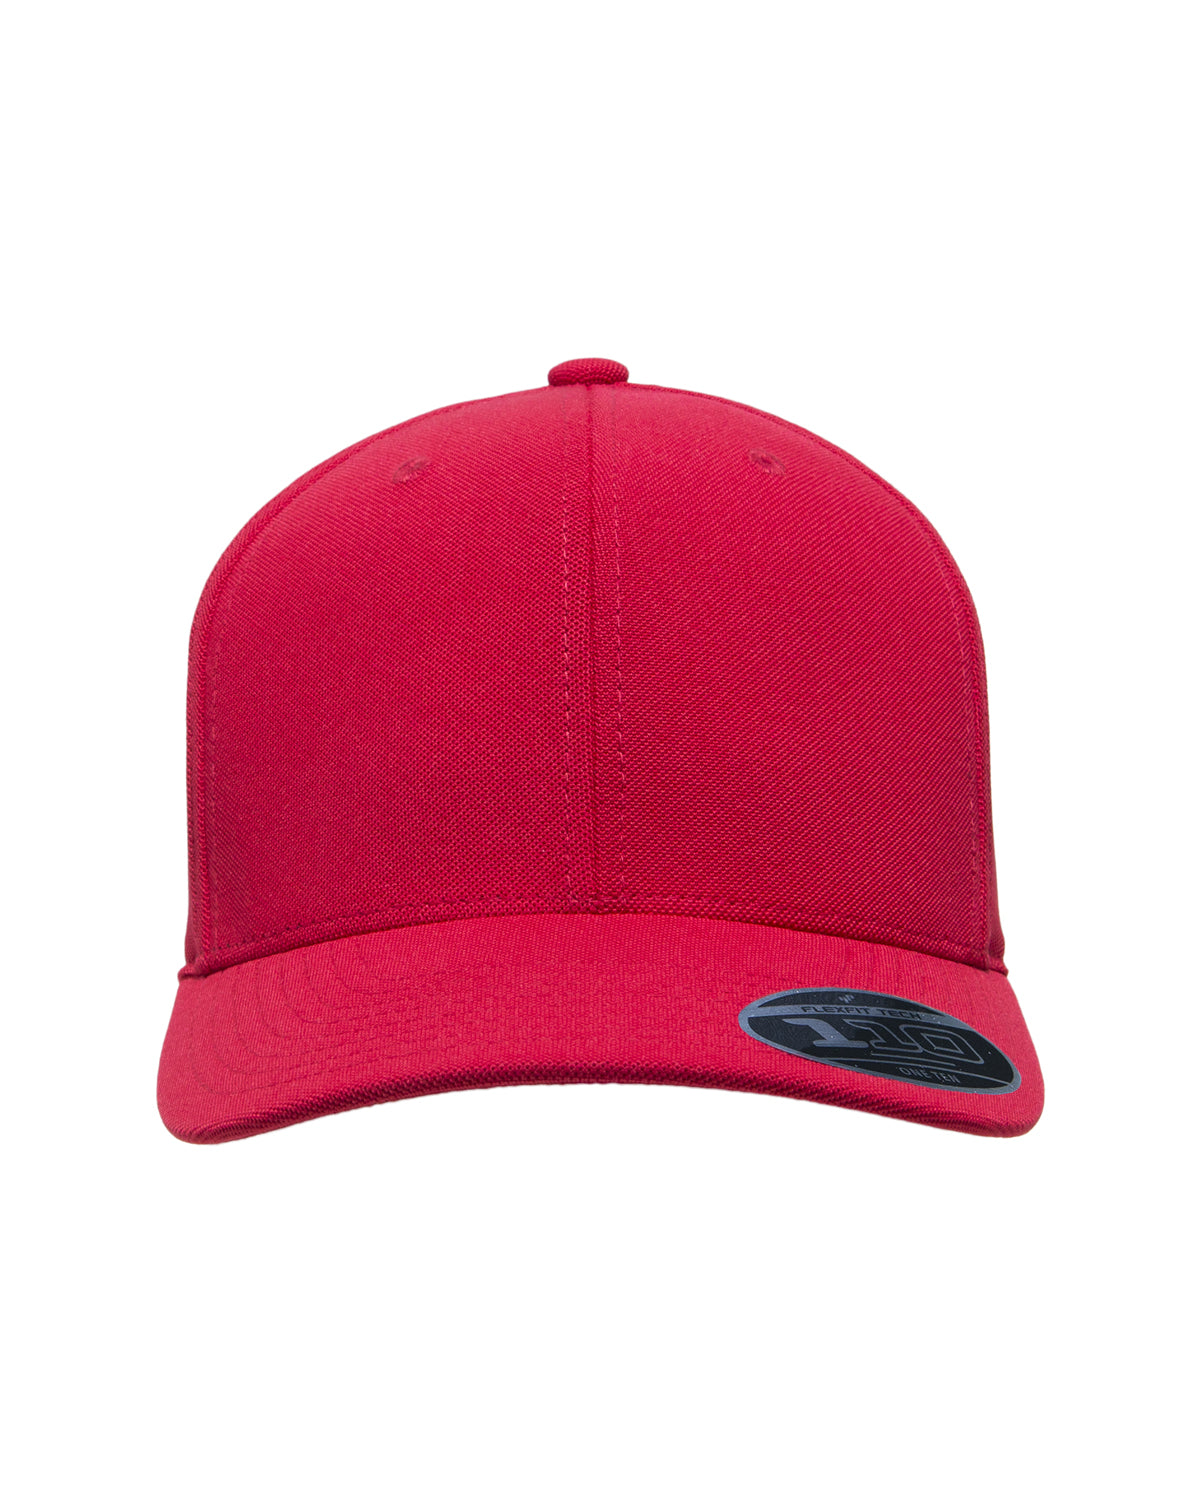 Team 365 ATB100 Mens Cool & Dry Moisture Wicking Adjustable Hat Red Front